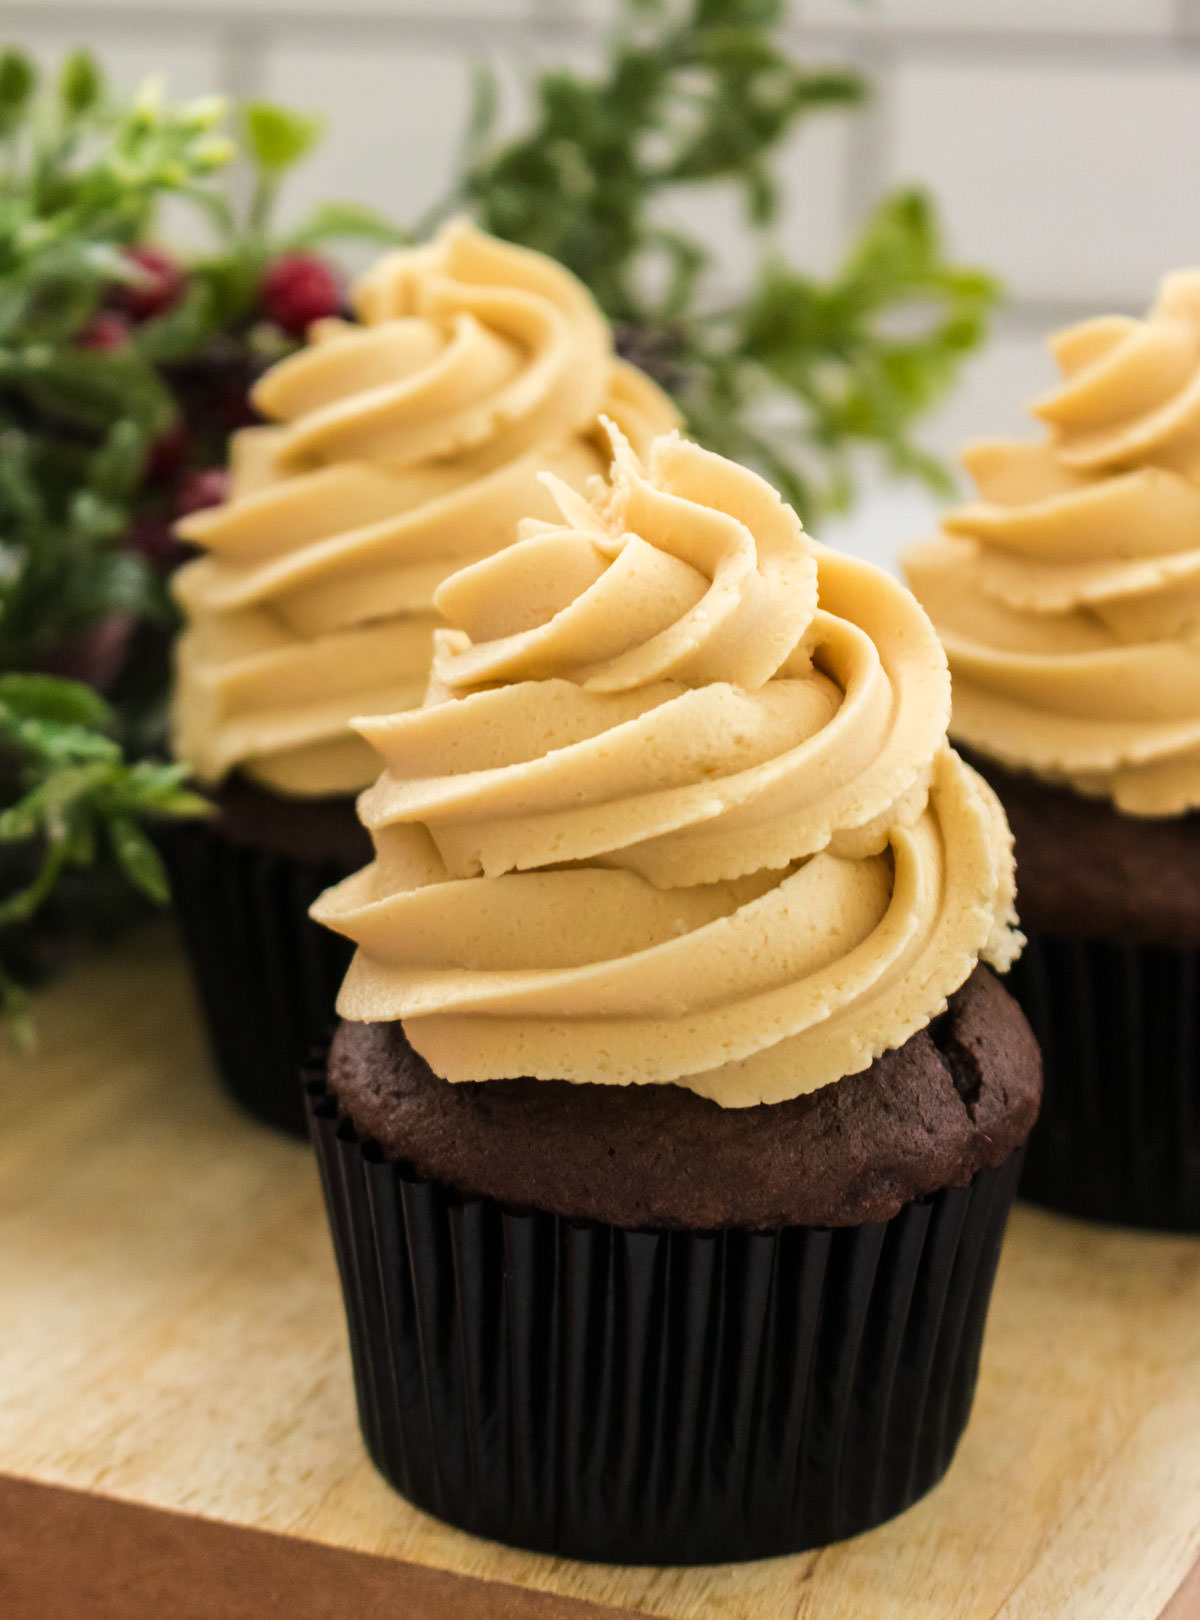 Closeup on three chocolate cupcakes topped with The Best Gingerbread Buttercream Frosting sitting on a wooden cutting board.